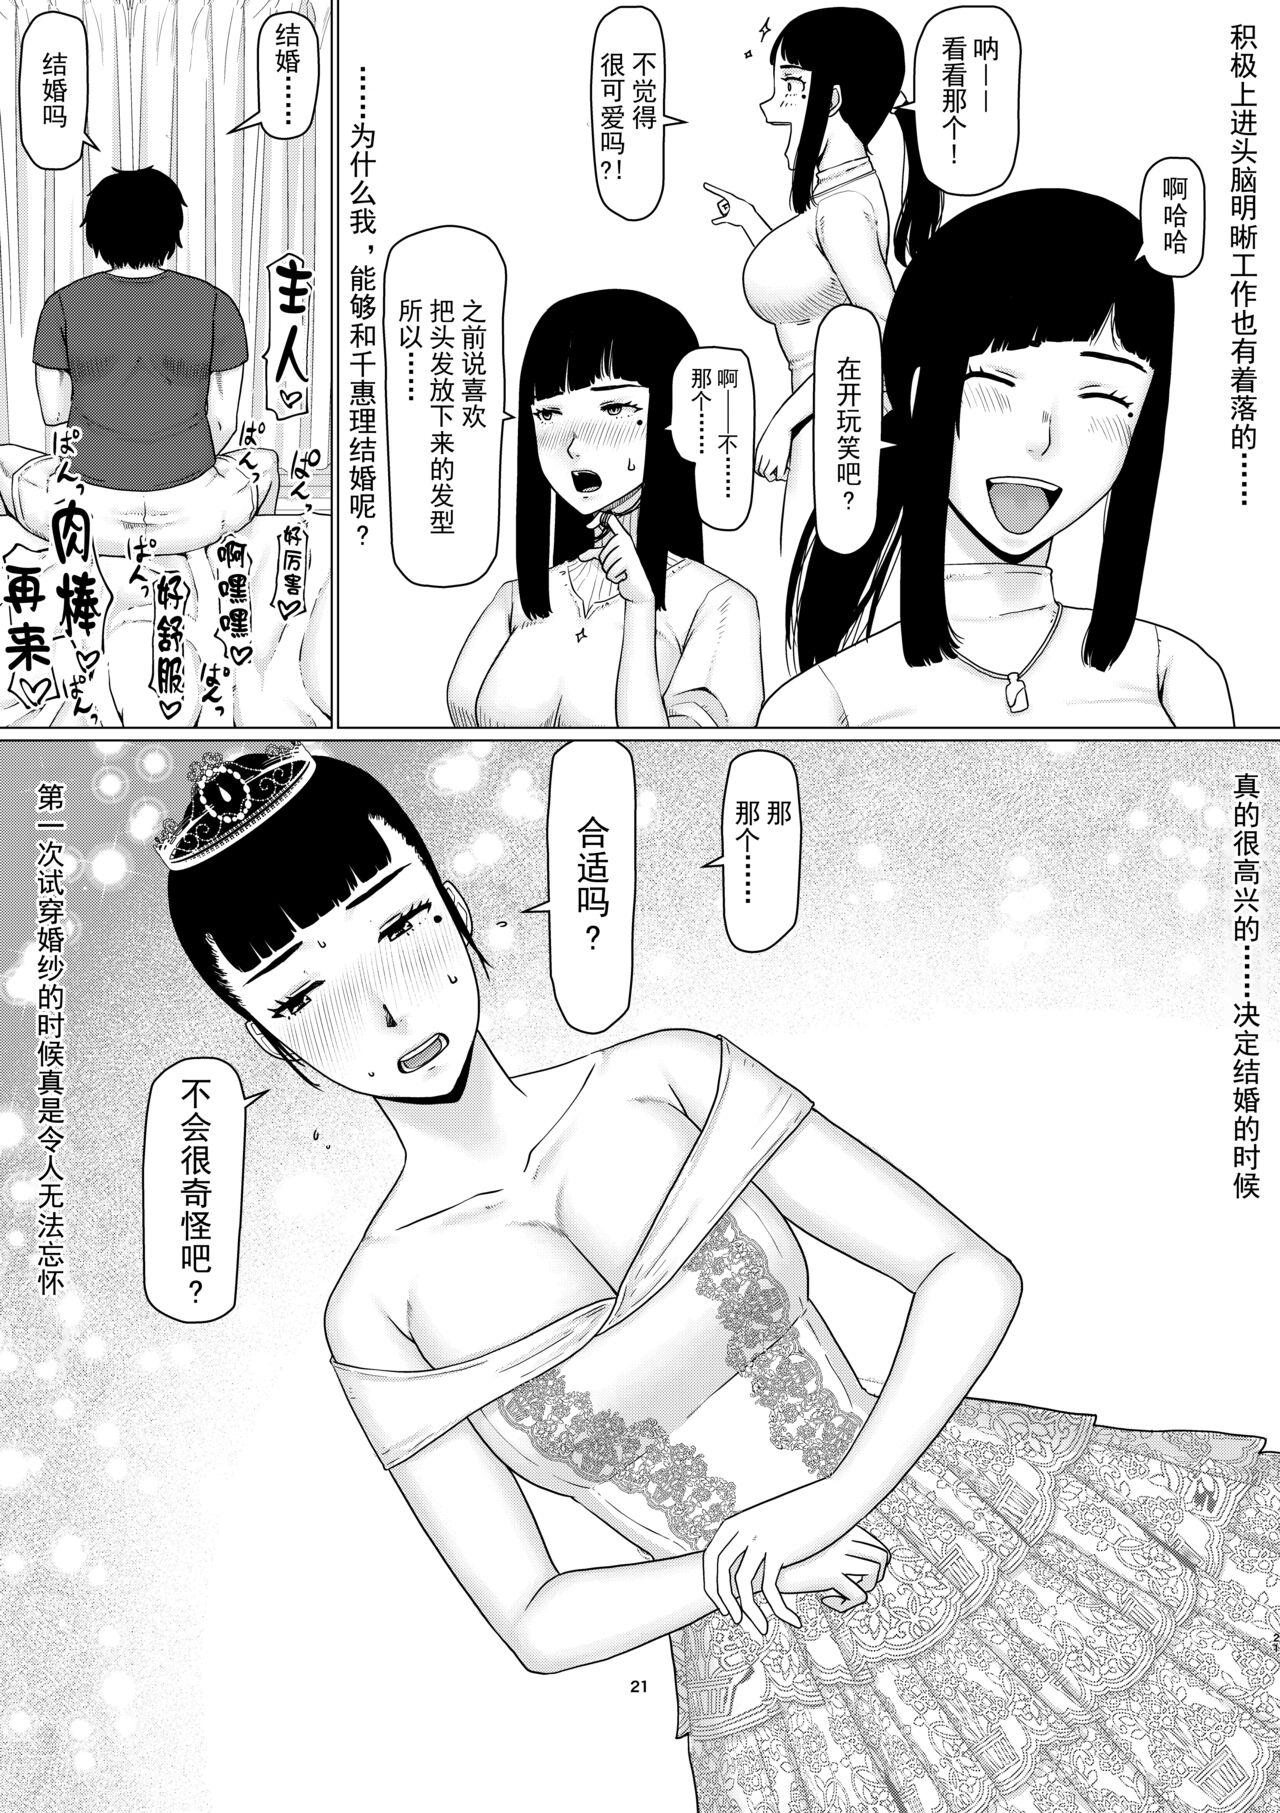 (Dōjinshi) Chieri can't lose!3 -Perverted toilet wife who fertilizes anyone's sperm with her husband's approval- Volume 1 (Original) [Chinese][超勇漢化組] 21